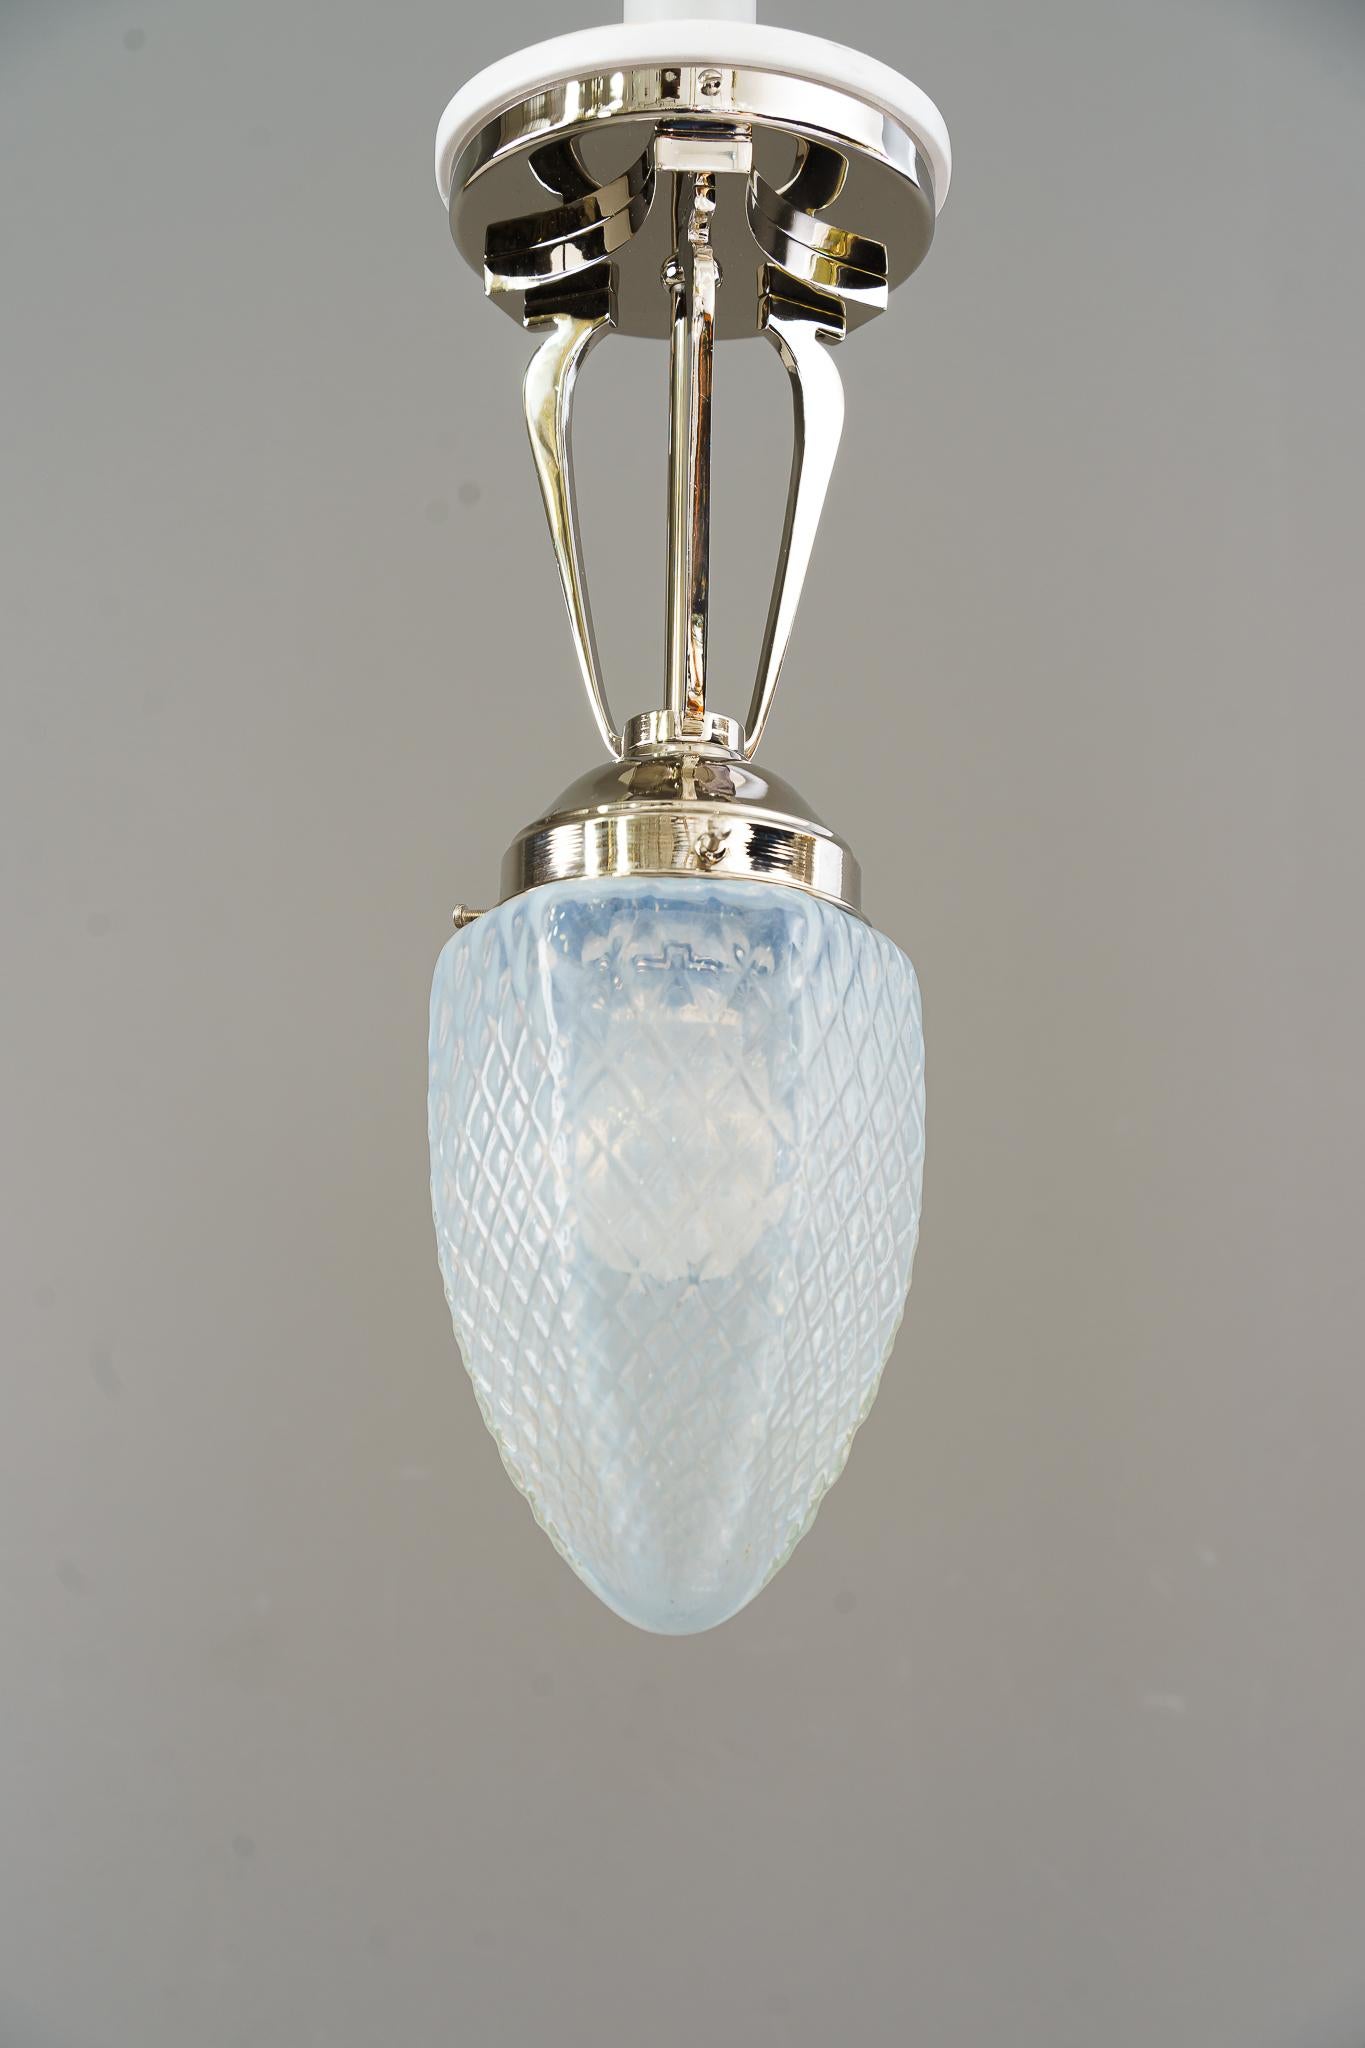 Art Deco ceiling lamp with opaline glass shade vienna around 1920s
Polished and stove enameled
Original opaline glass shade
Nickel - plated.